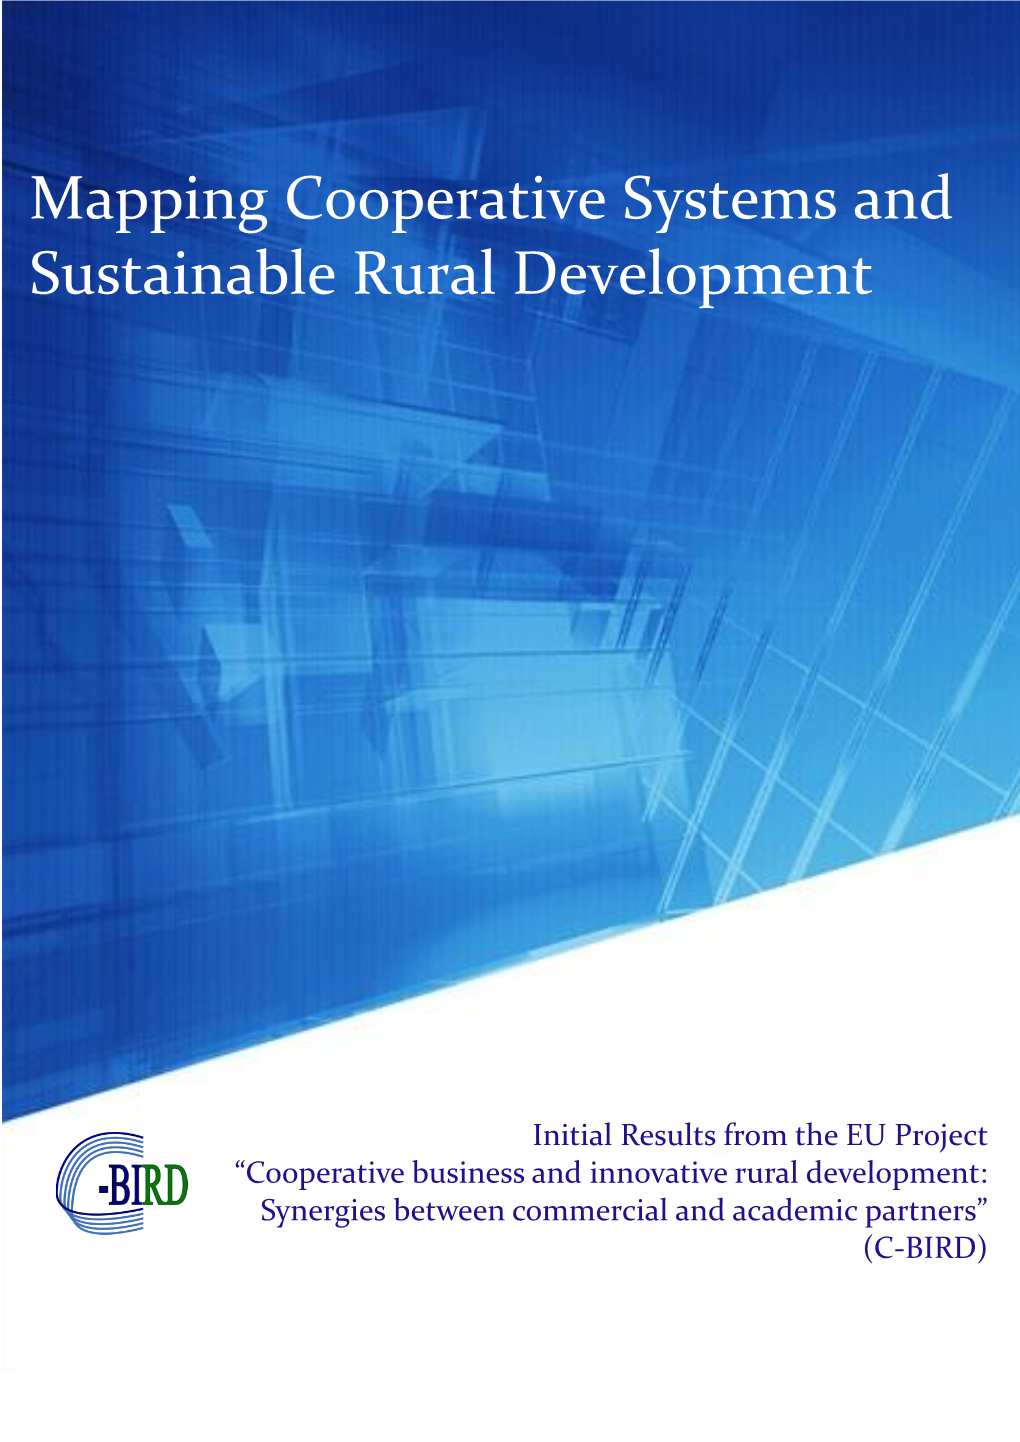 Initial Results from the EU Project “Cooperative Business and Innovative Rural Development: Synergies Between Commercial and Academic Partners” (C-BIRD)